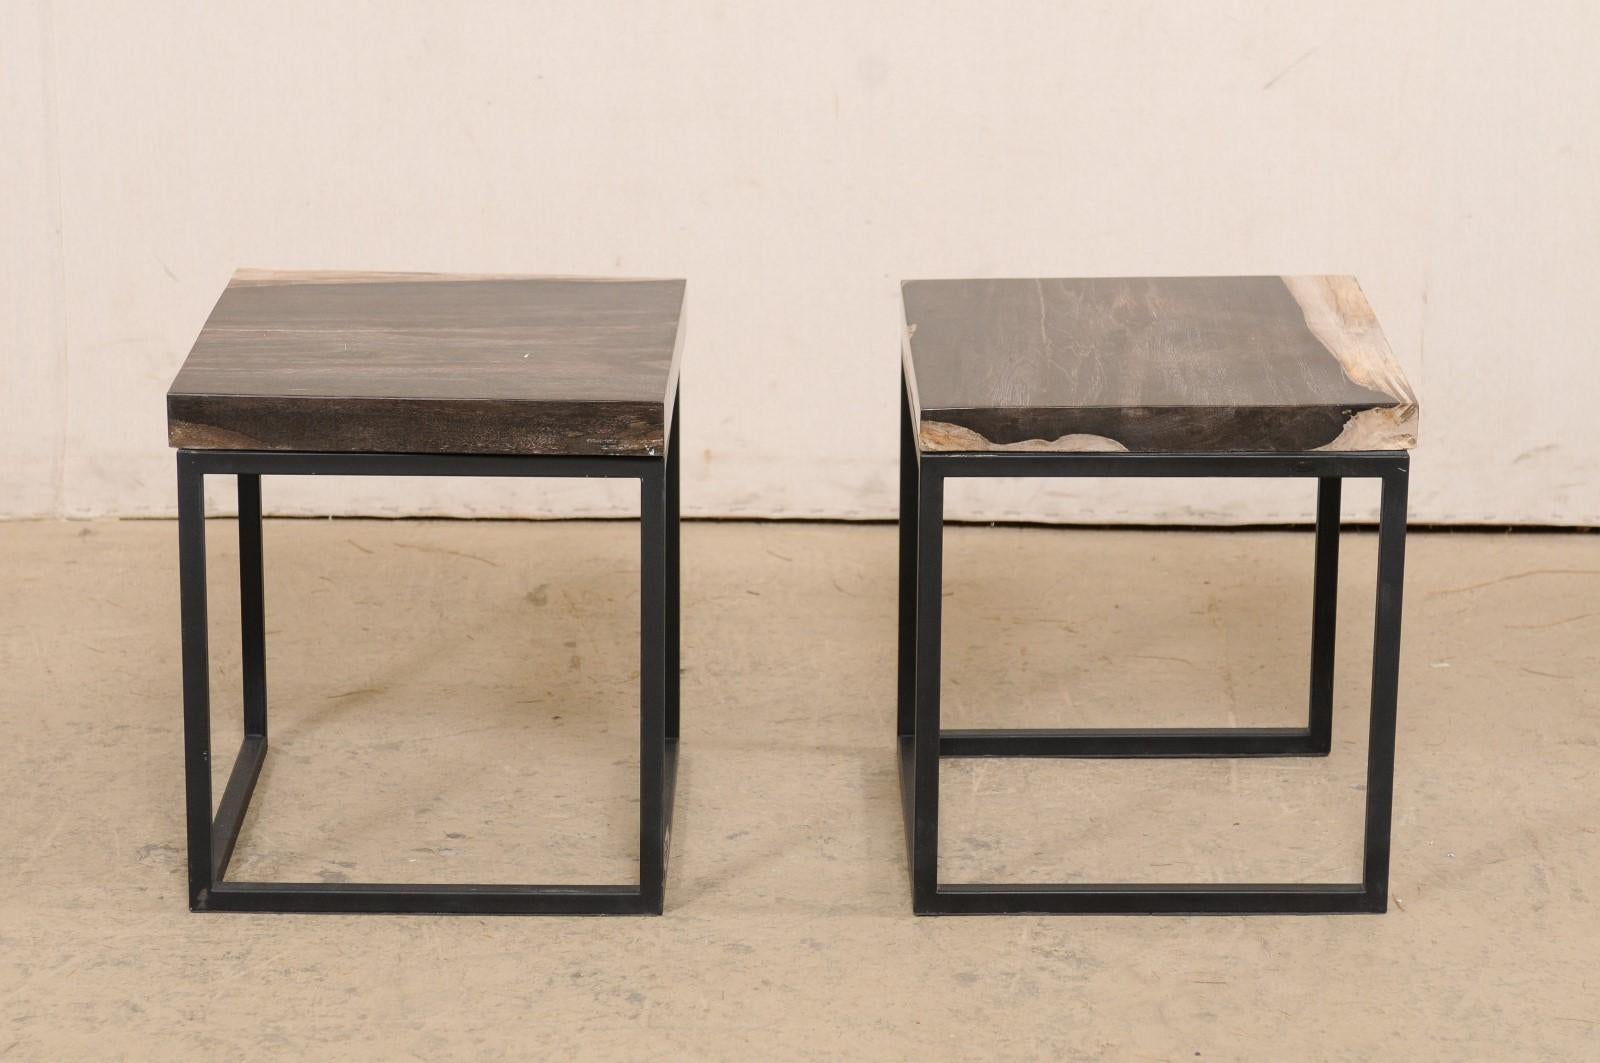 Pair of Petrified Wood Top Side Tables on Custom Iron Bases, Charcoal/Beige Tops For Sale 2